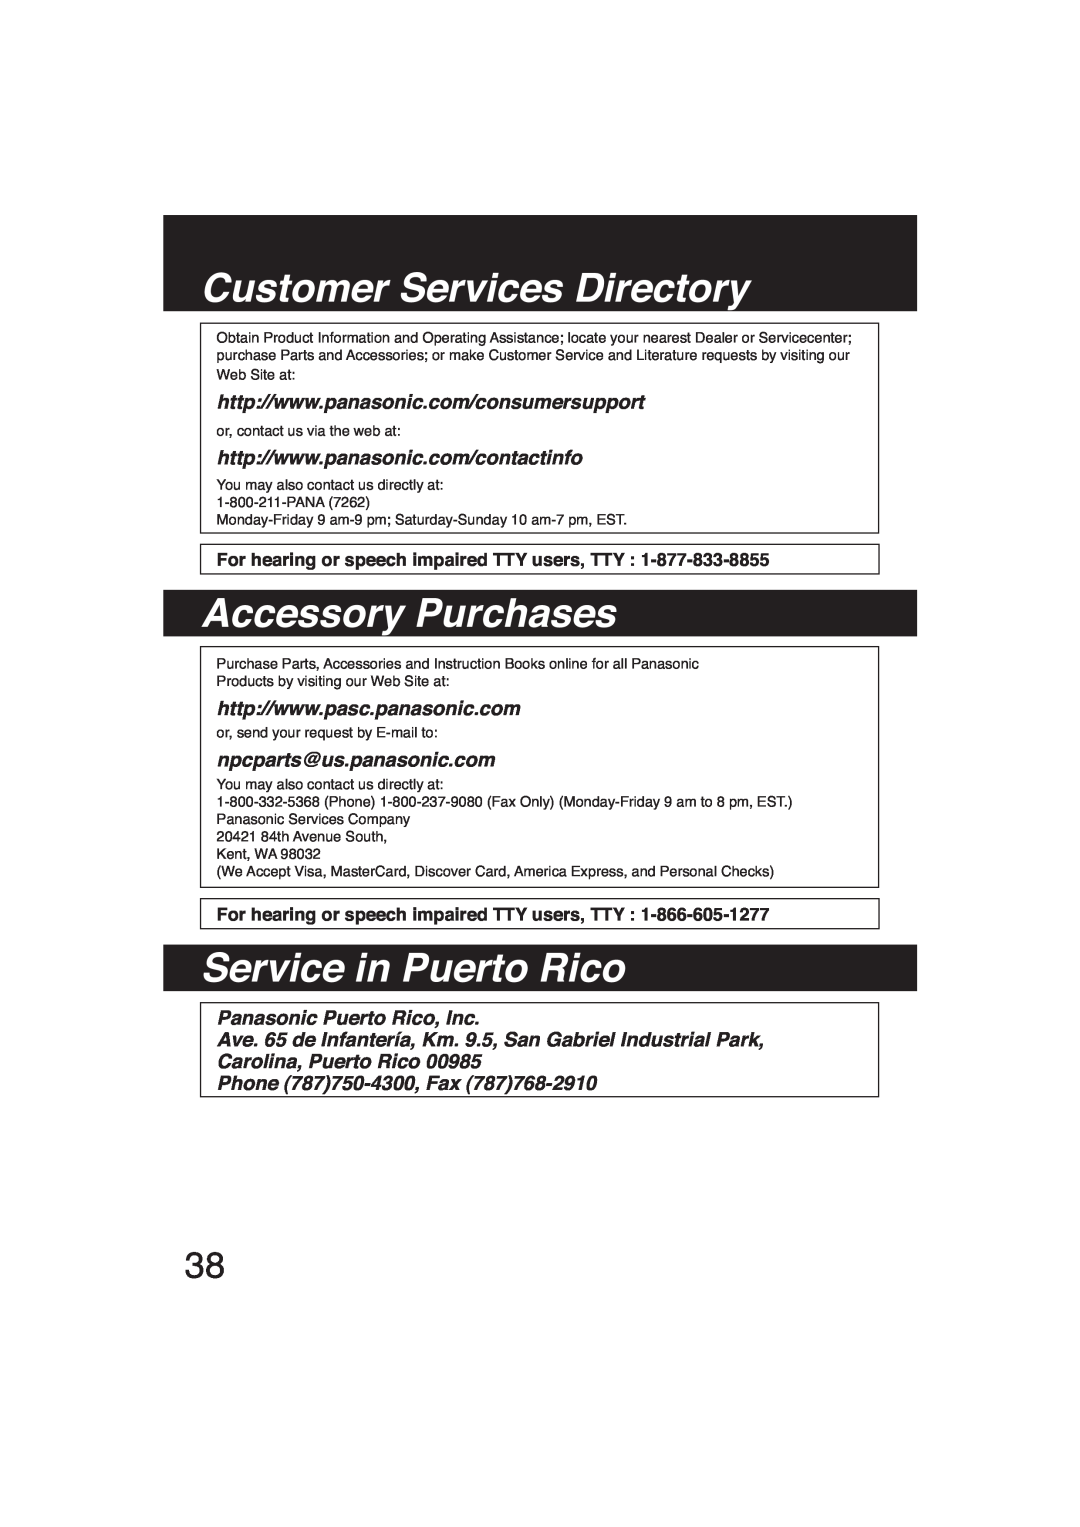 Panasonic SR-GA721 For hearing or speech impaired TTY users, TTY, Customer Services Directory, Accessory Purchases 